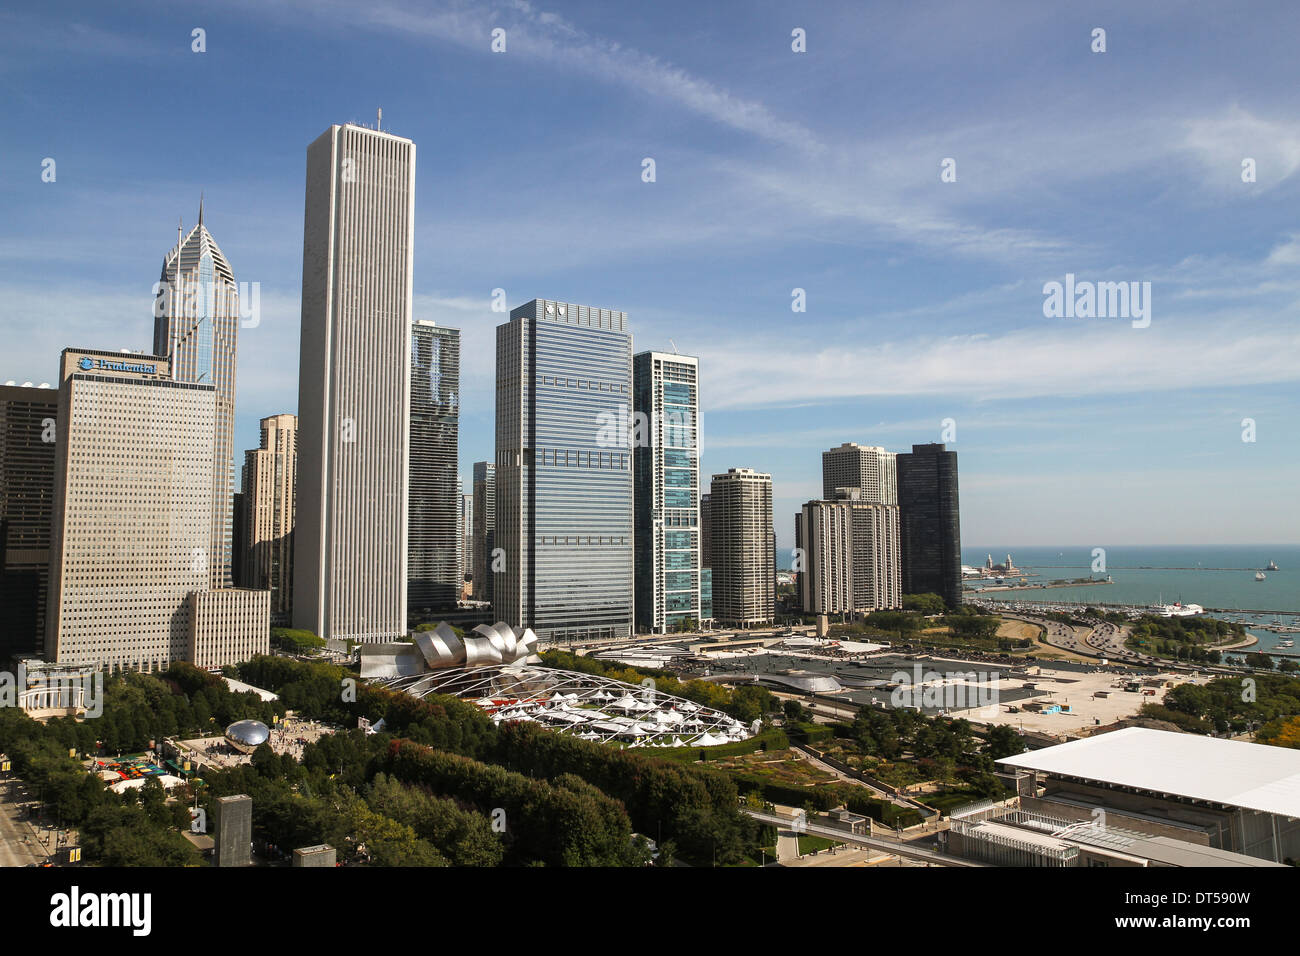 View of skyscrapers, Millennium Park, and Lake Michigan from the Cliff Dwellers Club, Chicago, Illinois Stock Photo